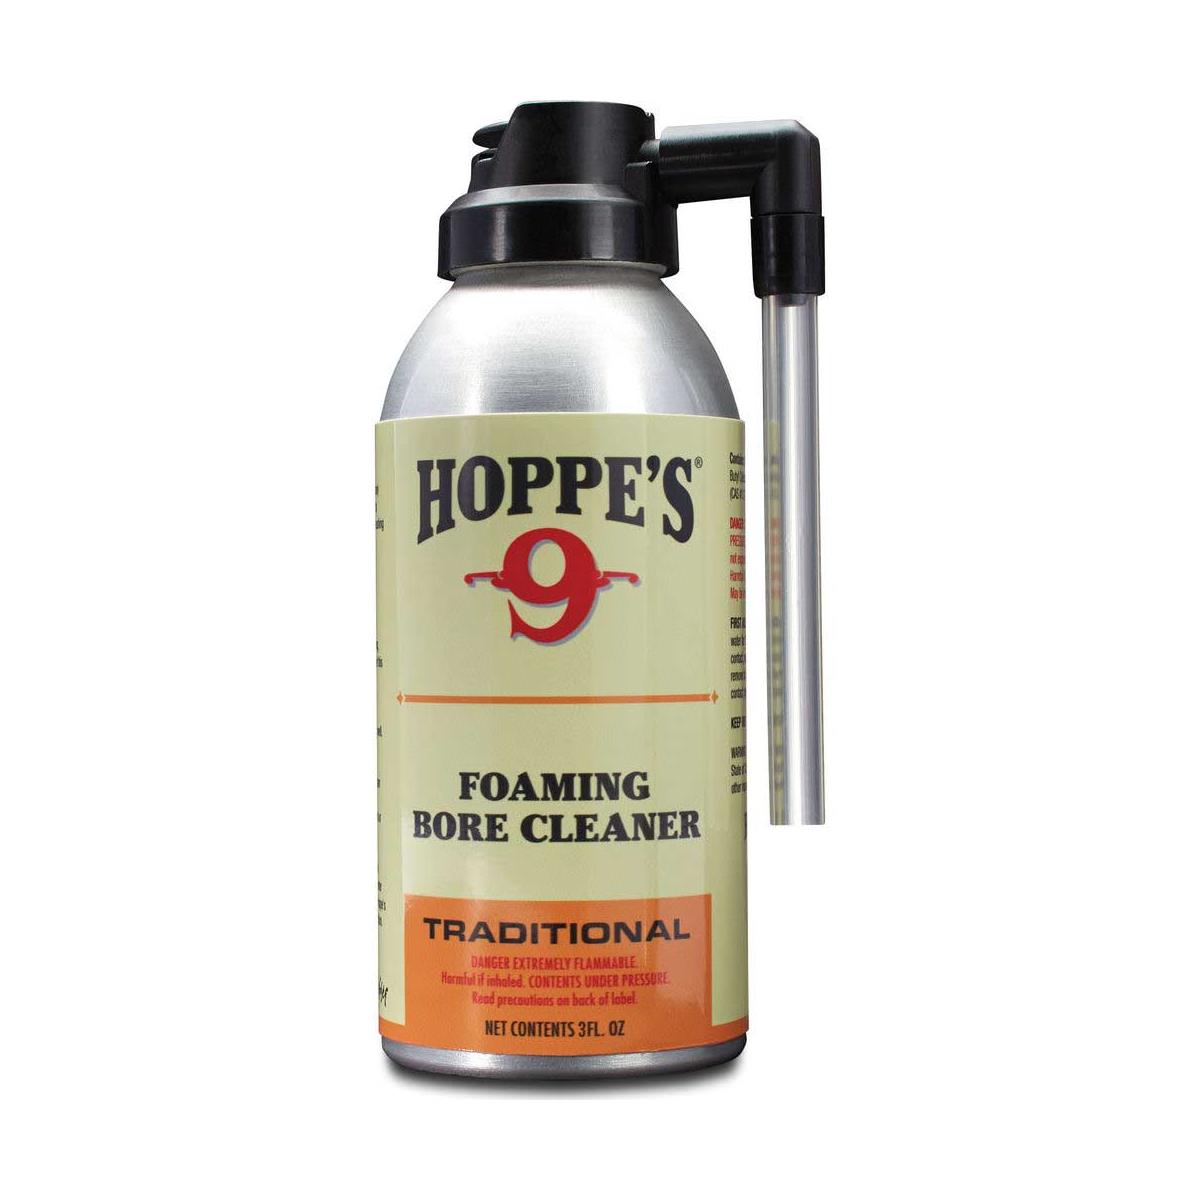 Image of Hoppe's 3oz Foaming Bore Cleaner